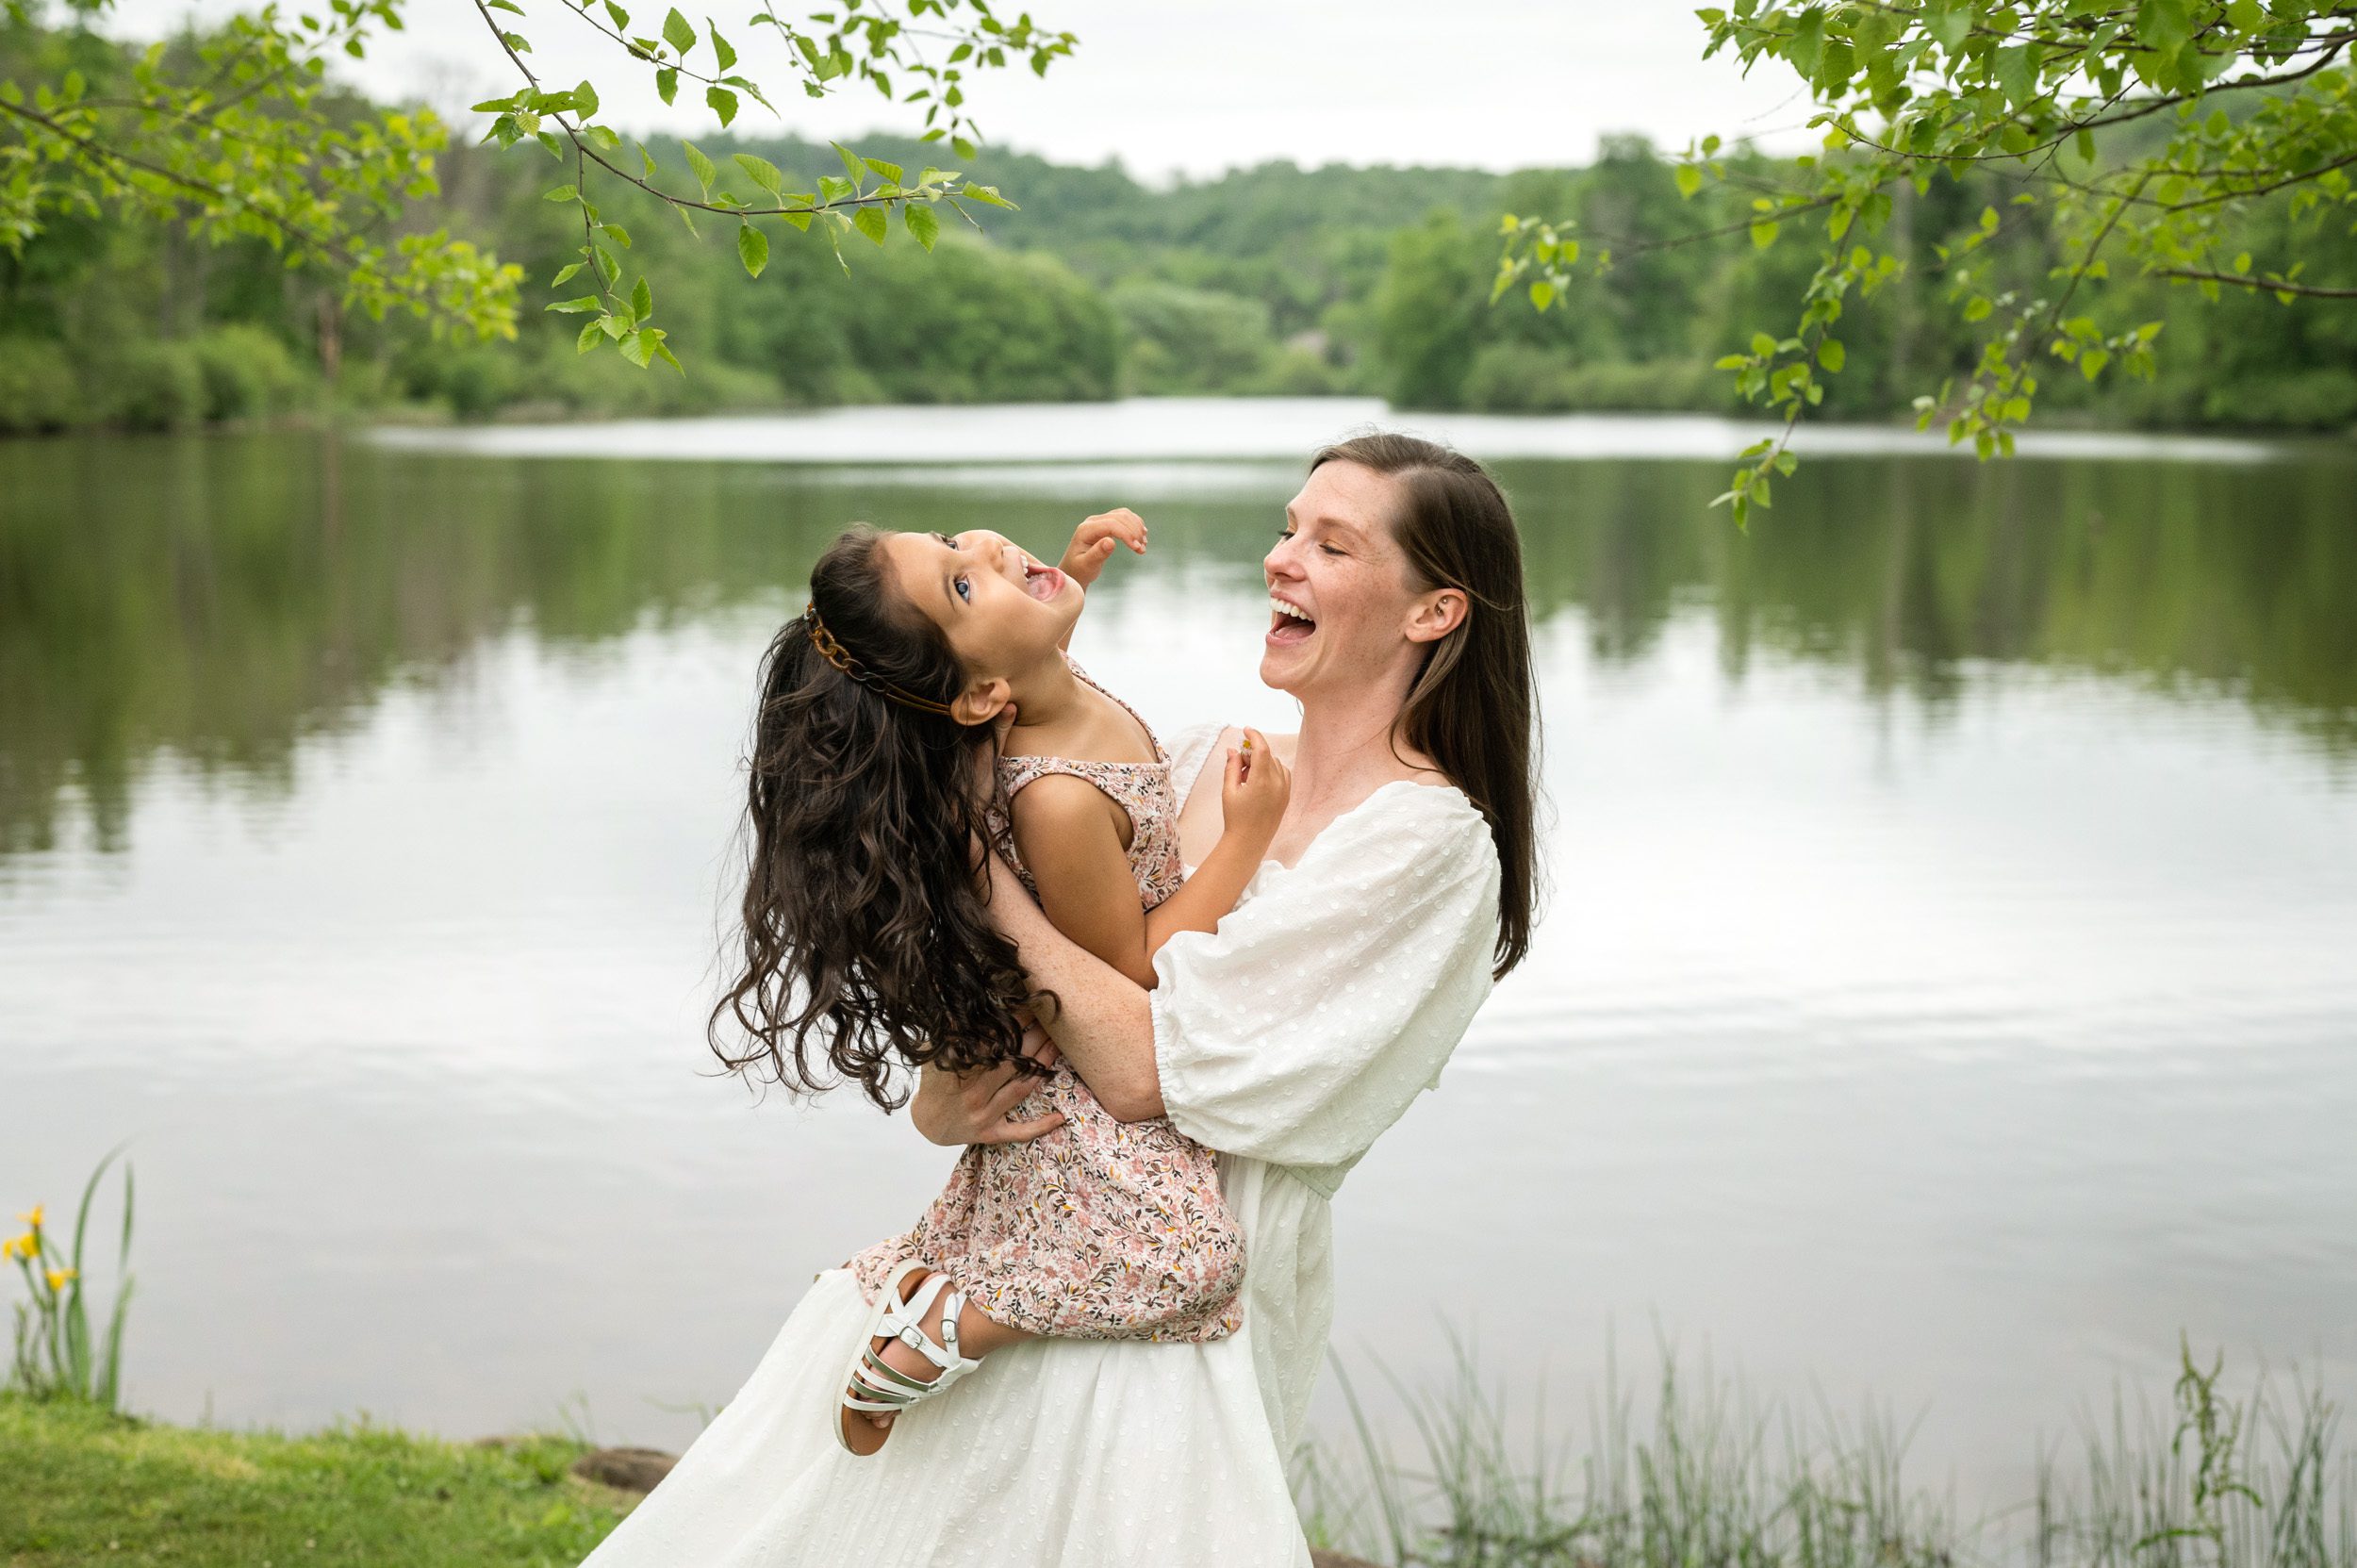 A mom standing in front of a lake and dipping her young daughter back as they both laugh during a family photoshoot